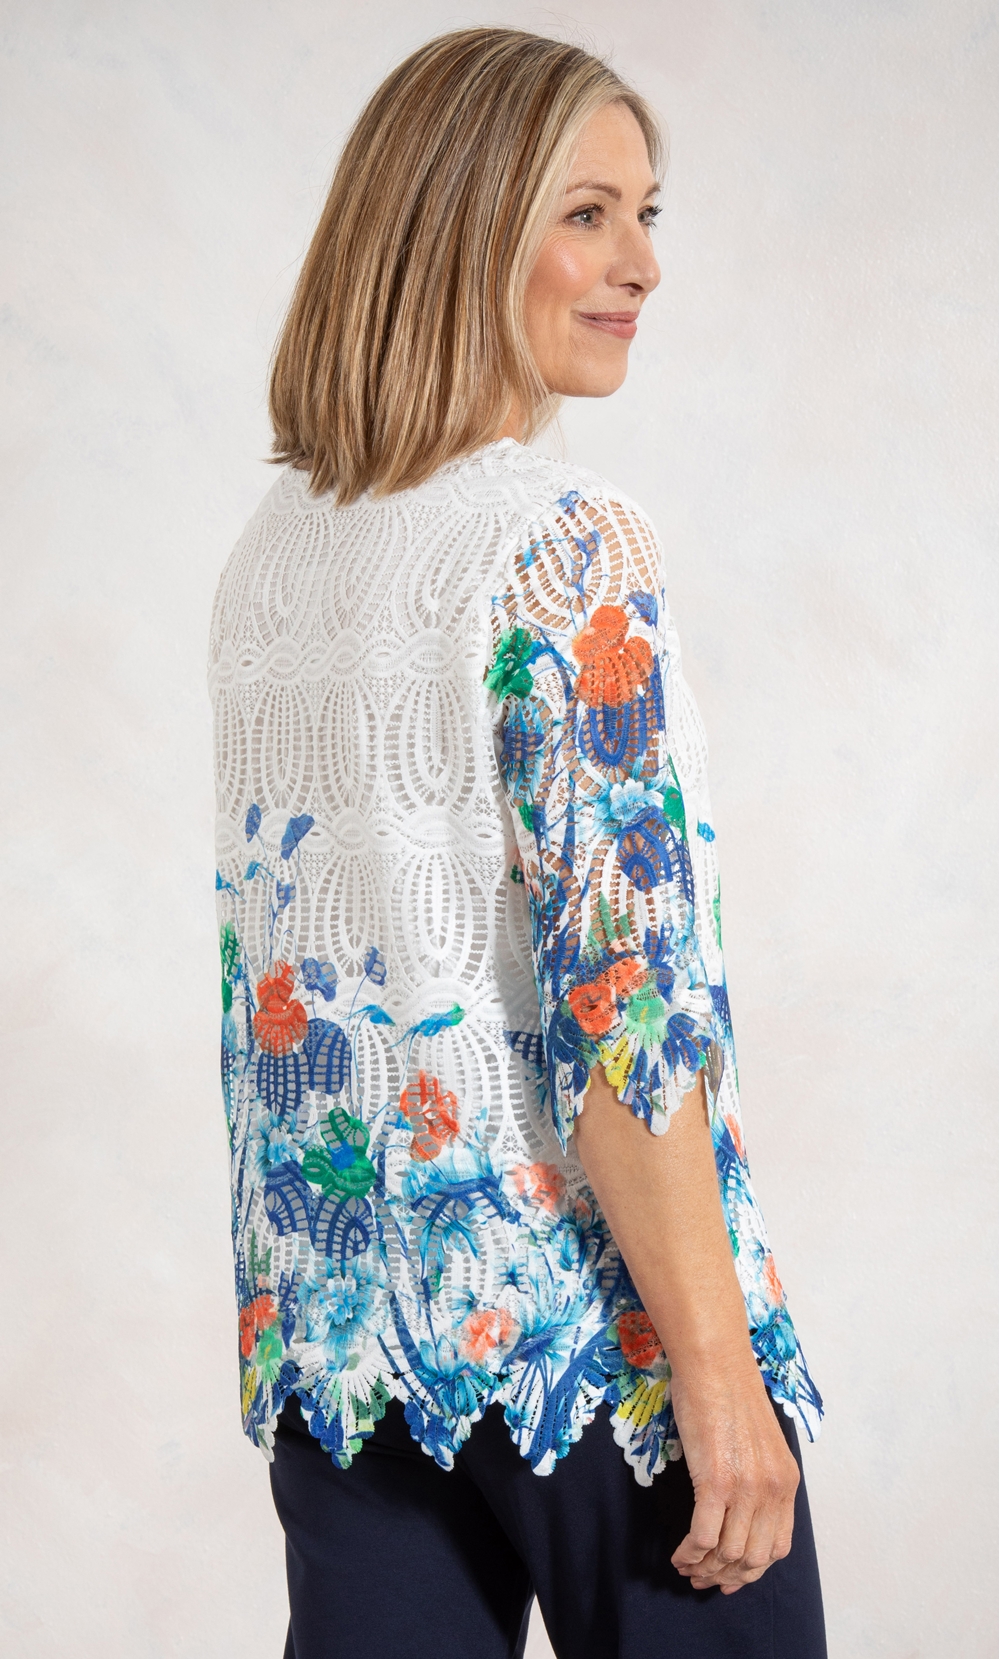 Anna Rose Border Printed Lace Top